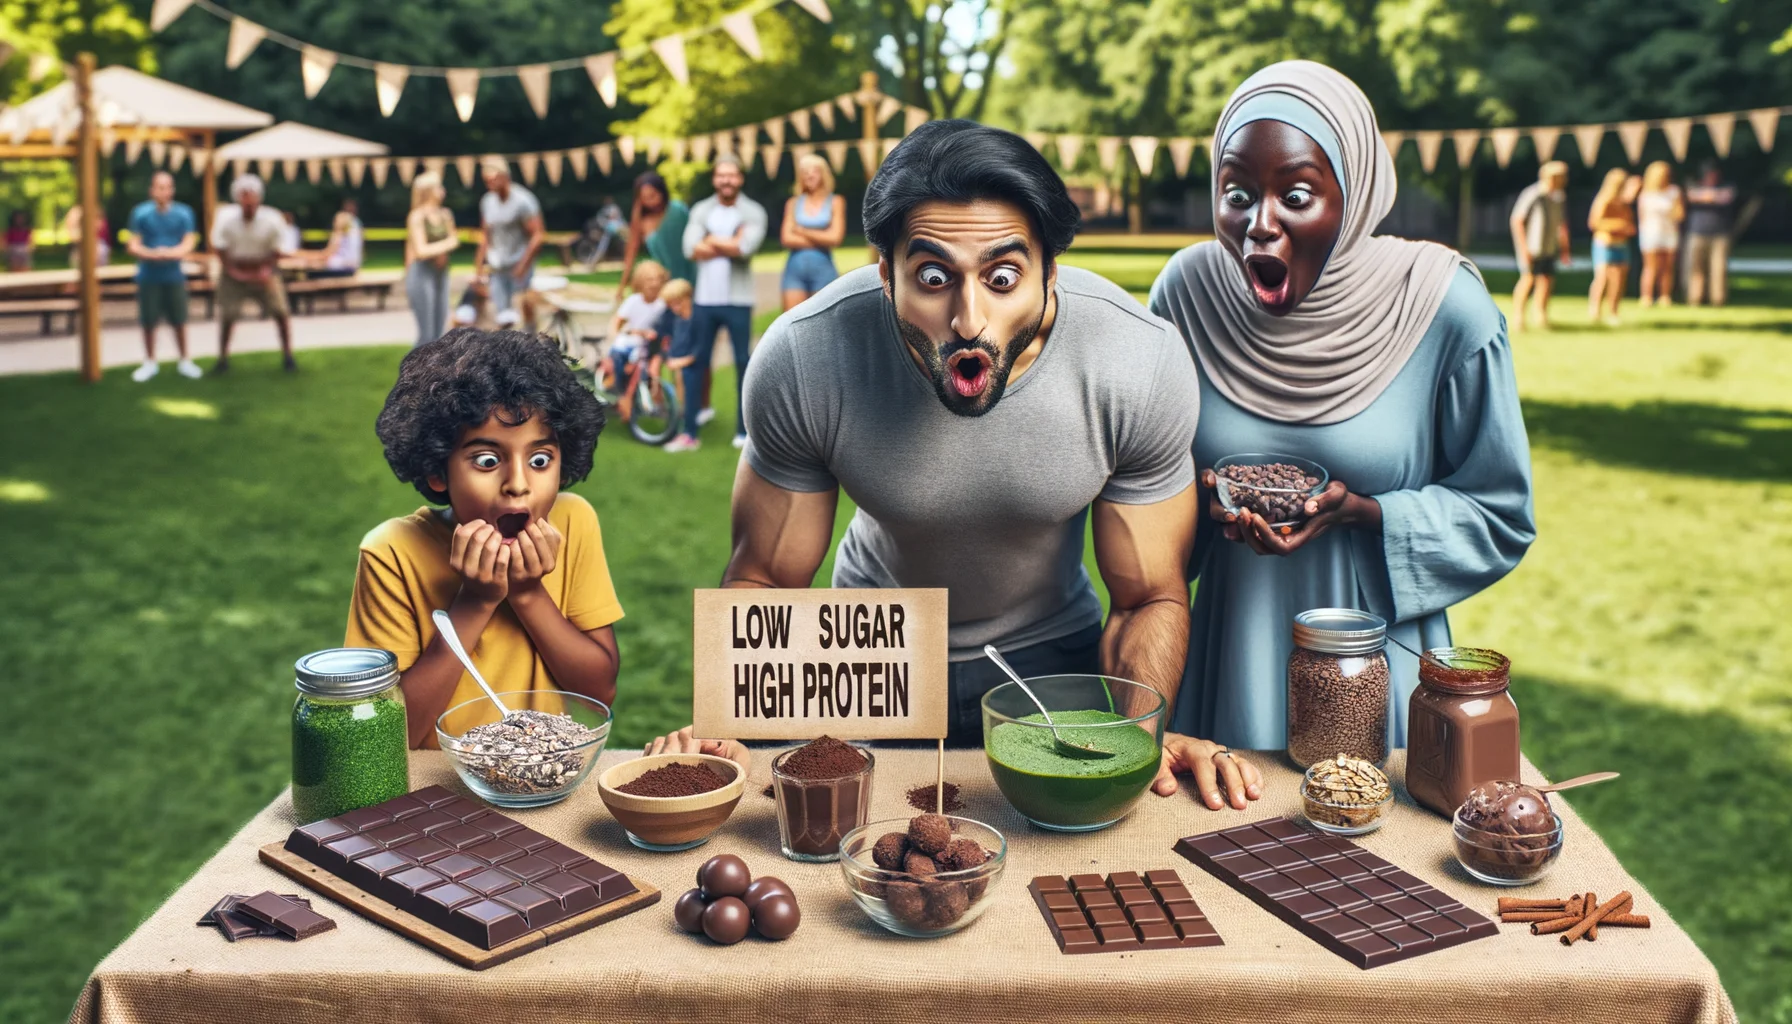 Picture this amusing, realistic scenario: It's a gathering of health enthusiasts in an outdoor park. A South Asian man is showing off his homemade ‘Weight-Conscious Chocolate Alternatives’. The table in front of him is laid out with an array of fascinating, healthy goodies - cacao nibs, dark chocolate infused with spirulina, chocolate oat energy balls, and even chocolate protein shakes. There's a sign proudly displayed, boasting 'Low Sugar, High Protein'. A black woman and a Middle-Eastern kid are tasting the treats with wide-eyed surprise. Their expressions tell tales of unexpected delight, making the scene funny and heartwarming.